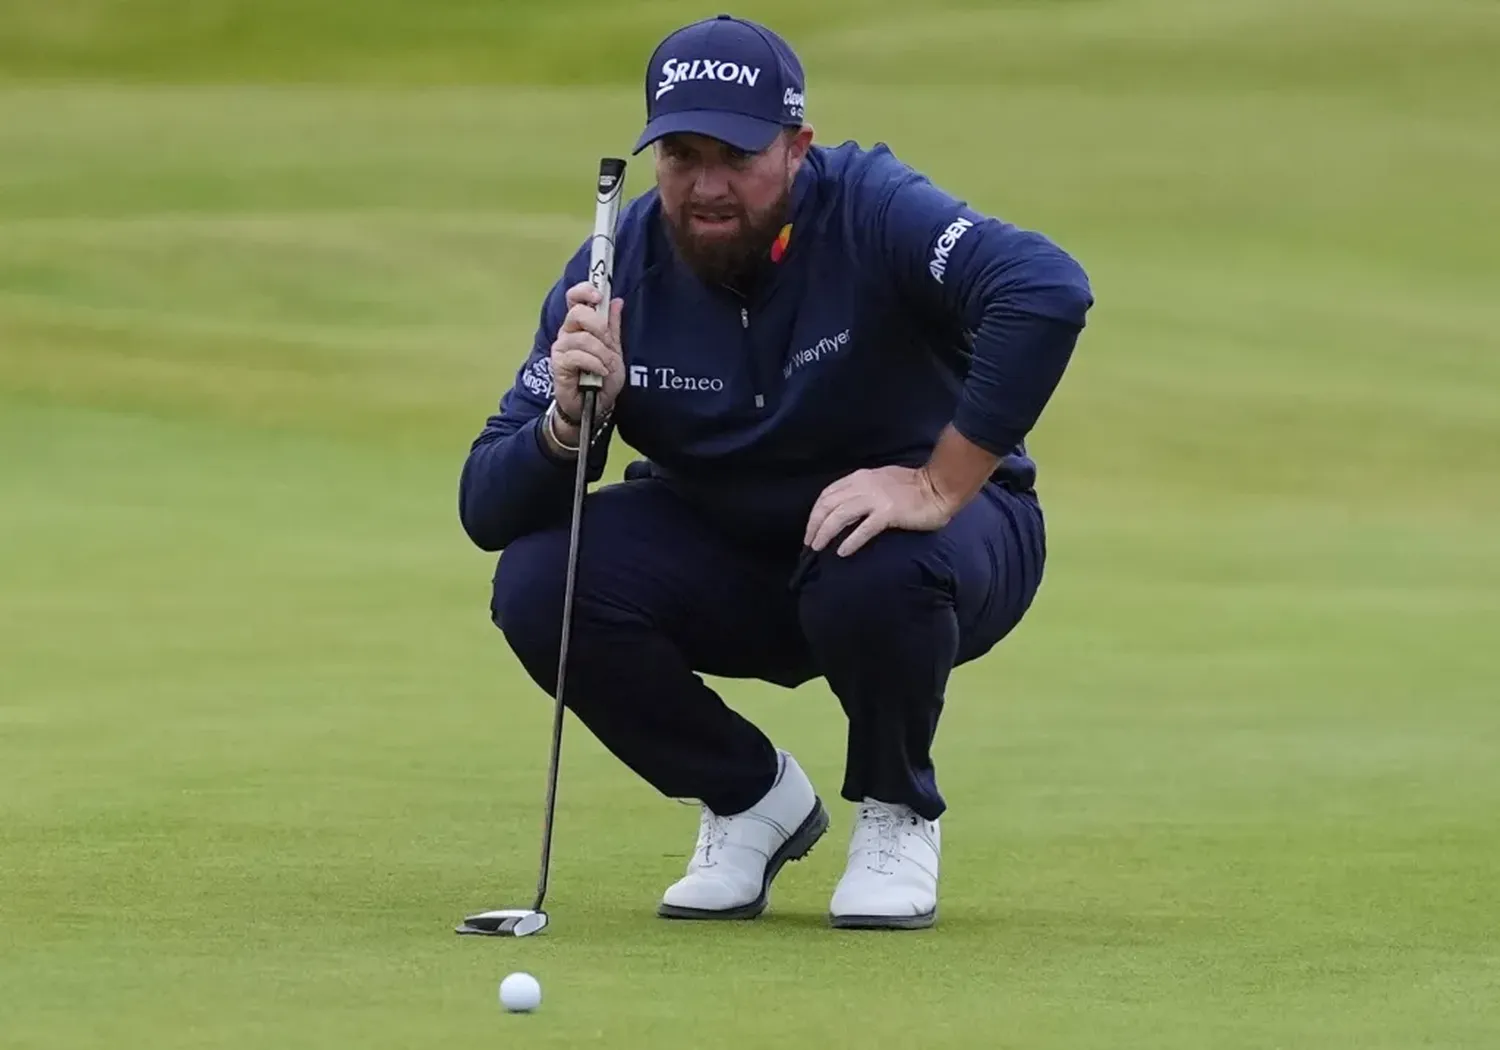 Daniel Brown Leads Shane Lowry After Round 1 of The Open Championship